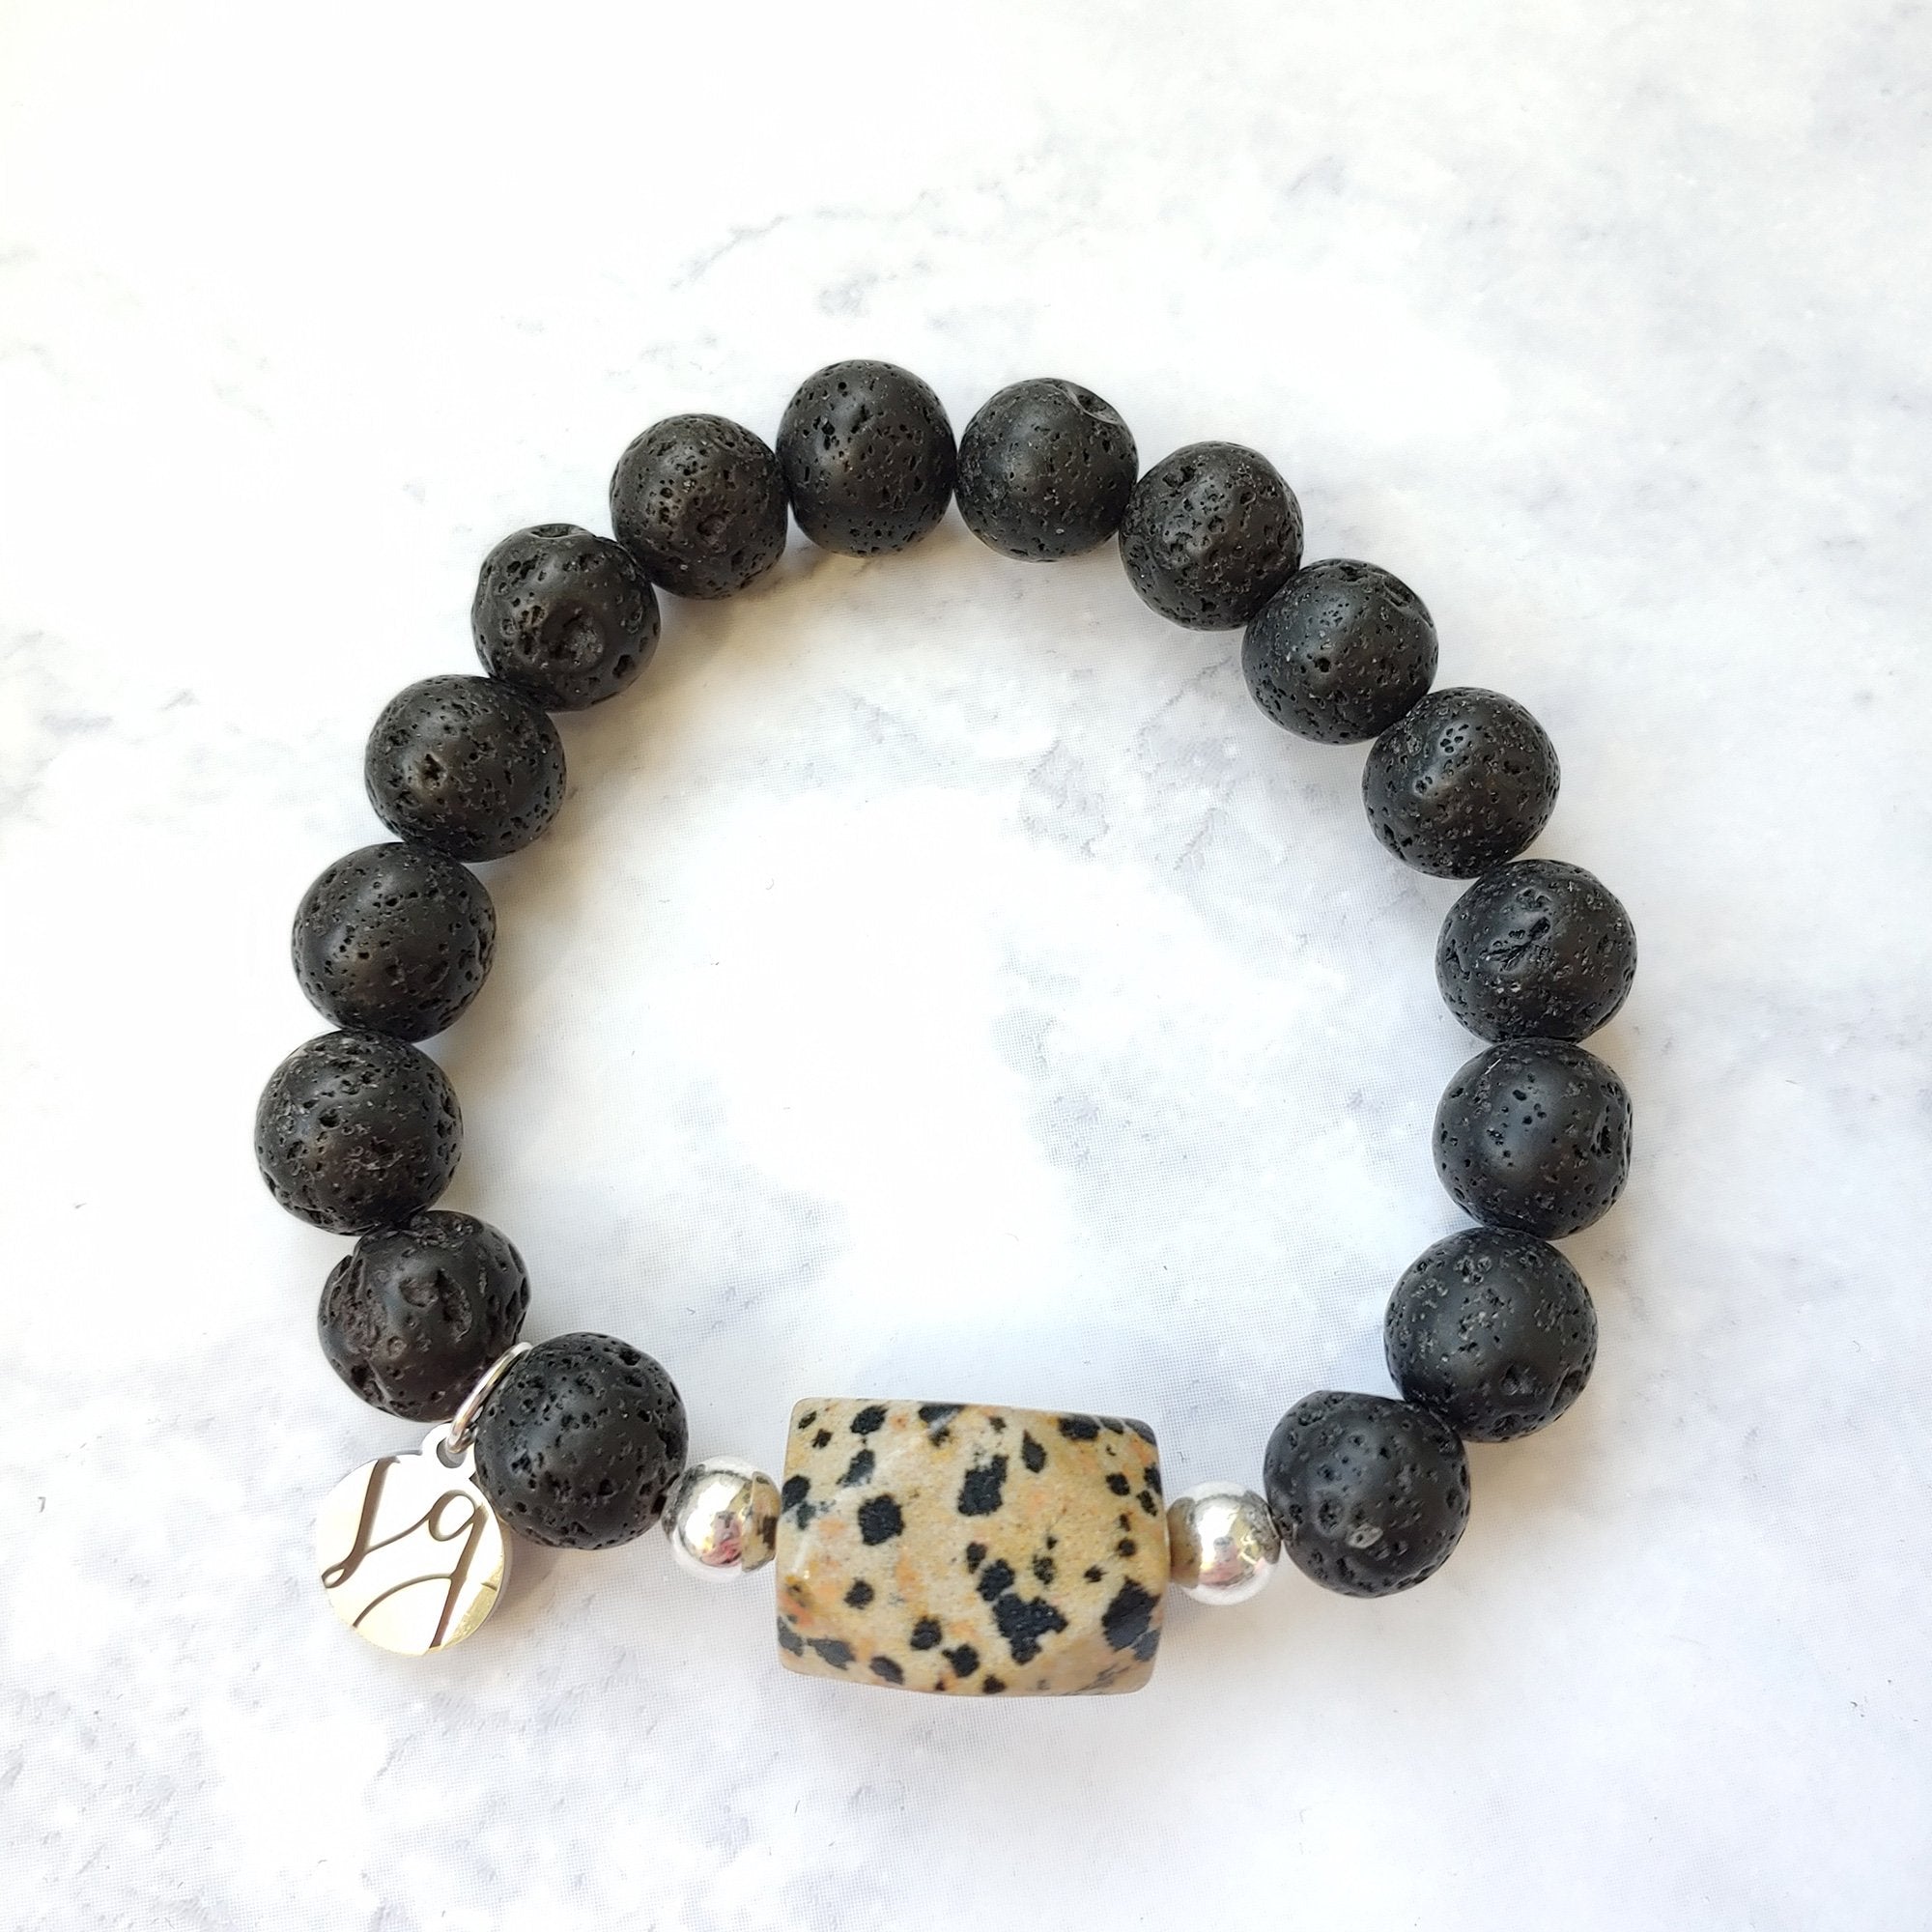 Posey Spotted Lava Charcoal Dalmatian Jasper Beaded Aromatherapy Essential Oil Stretch Bracelet